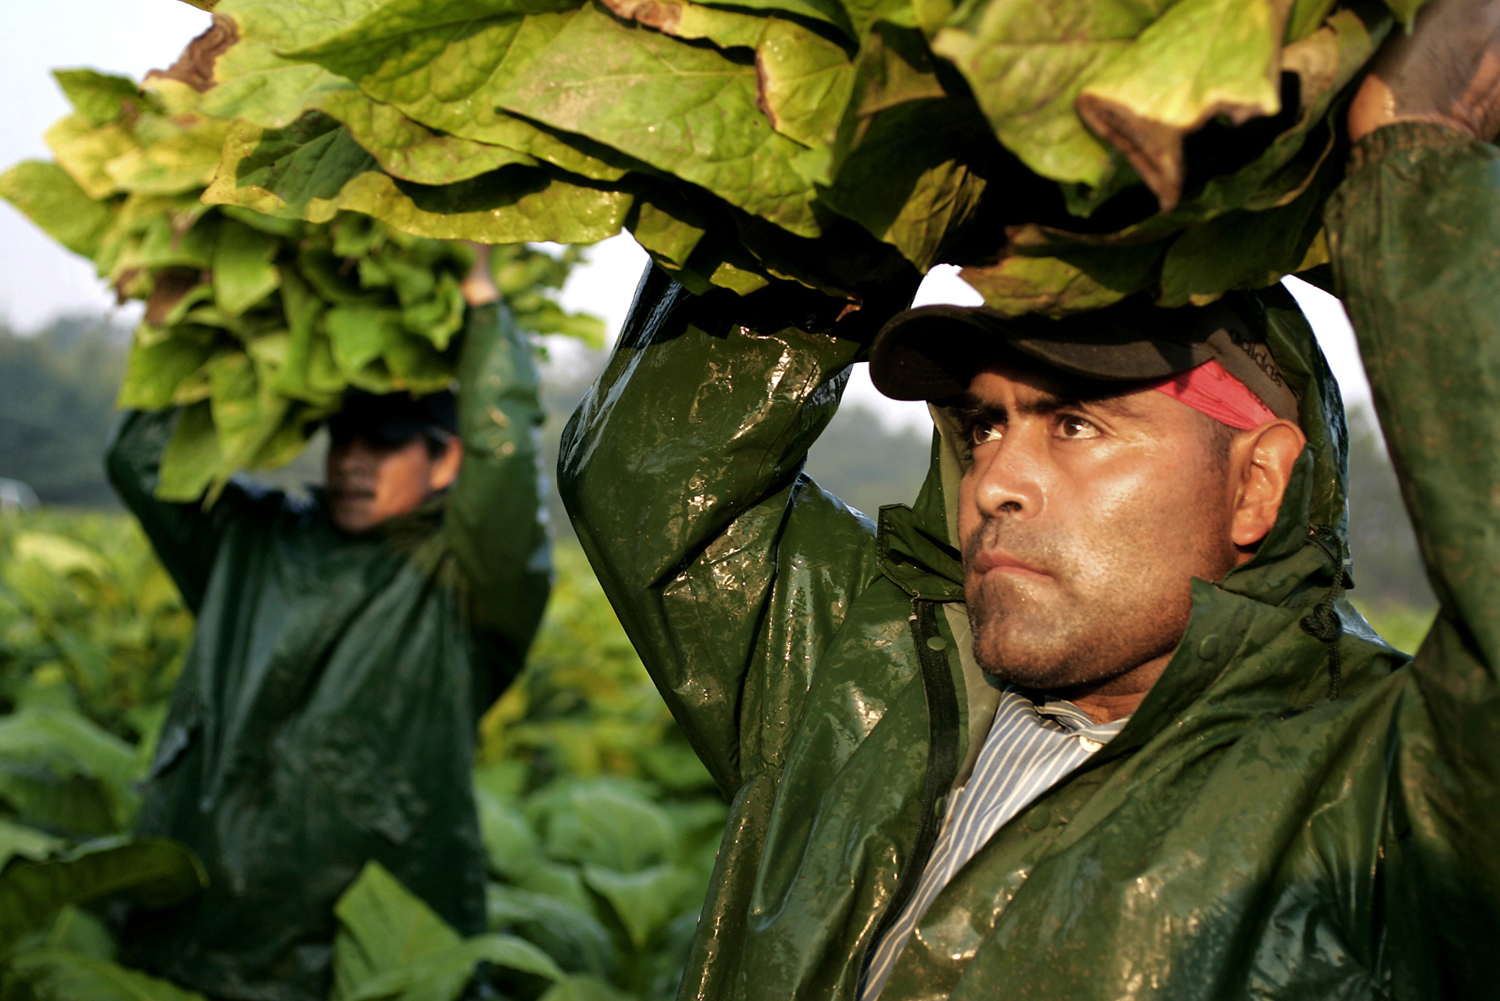 Mario Gervacio (right) and Juan Hernandez Gonzalez each carry an armful of freshly picked tobacco leaves over their heads, high enough to pile them in the trailer following them through the fields as they pick during sunrise.